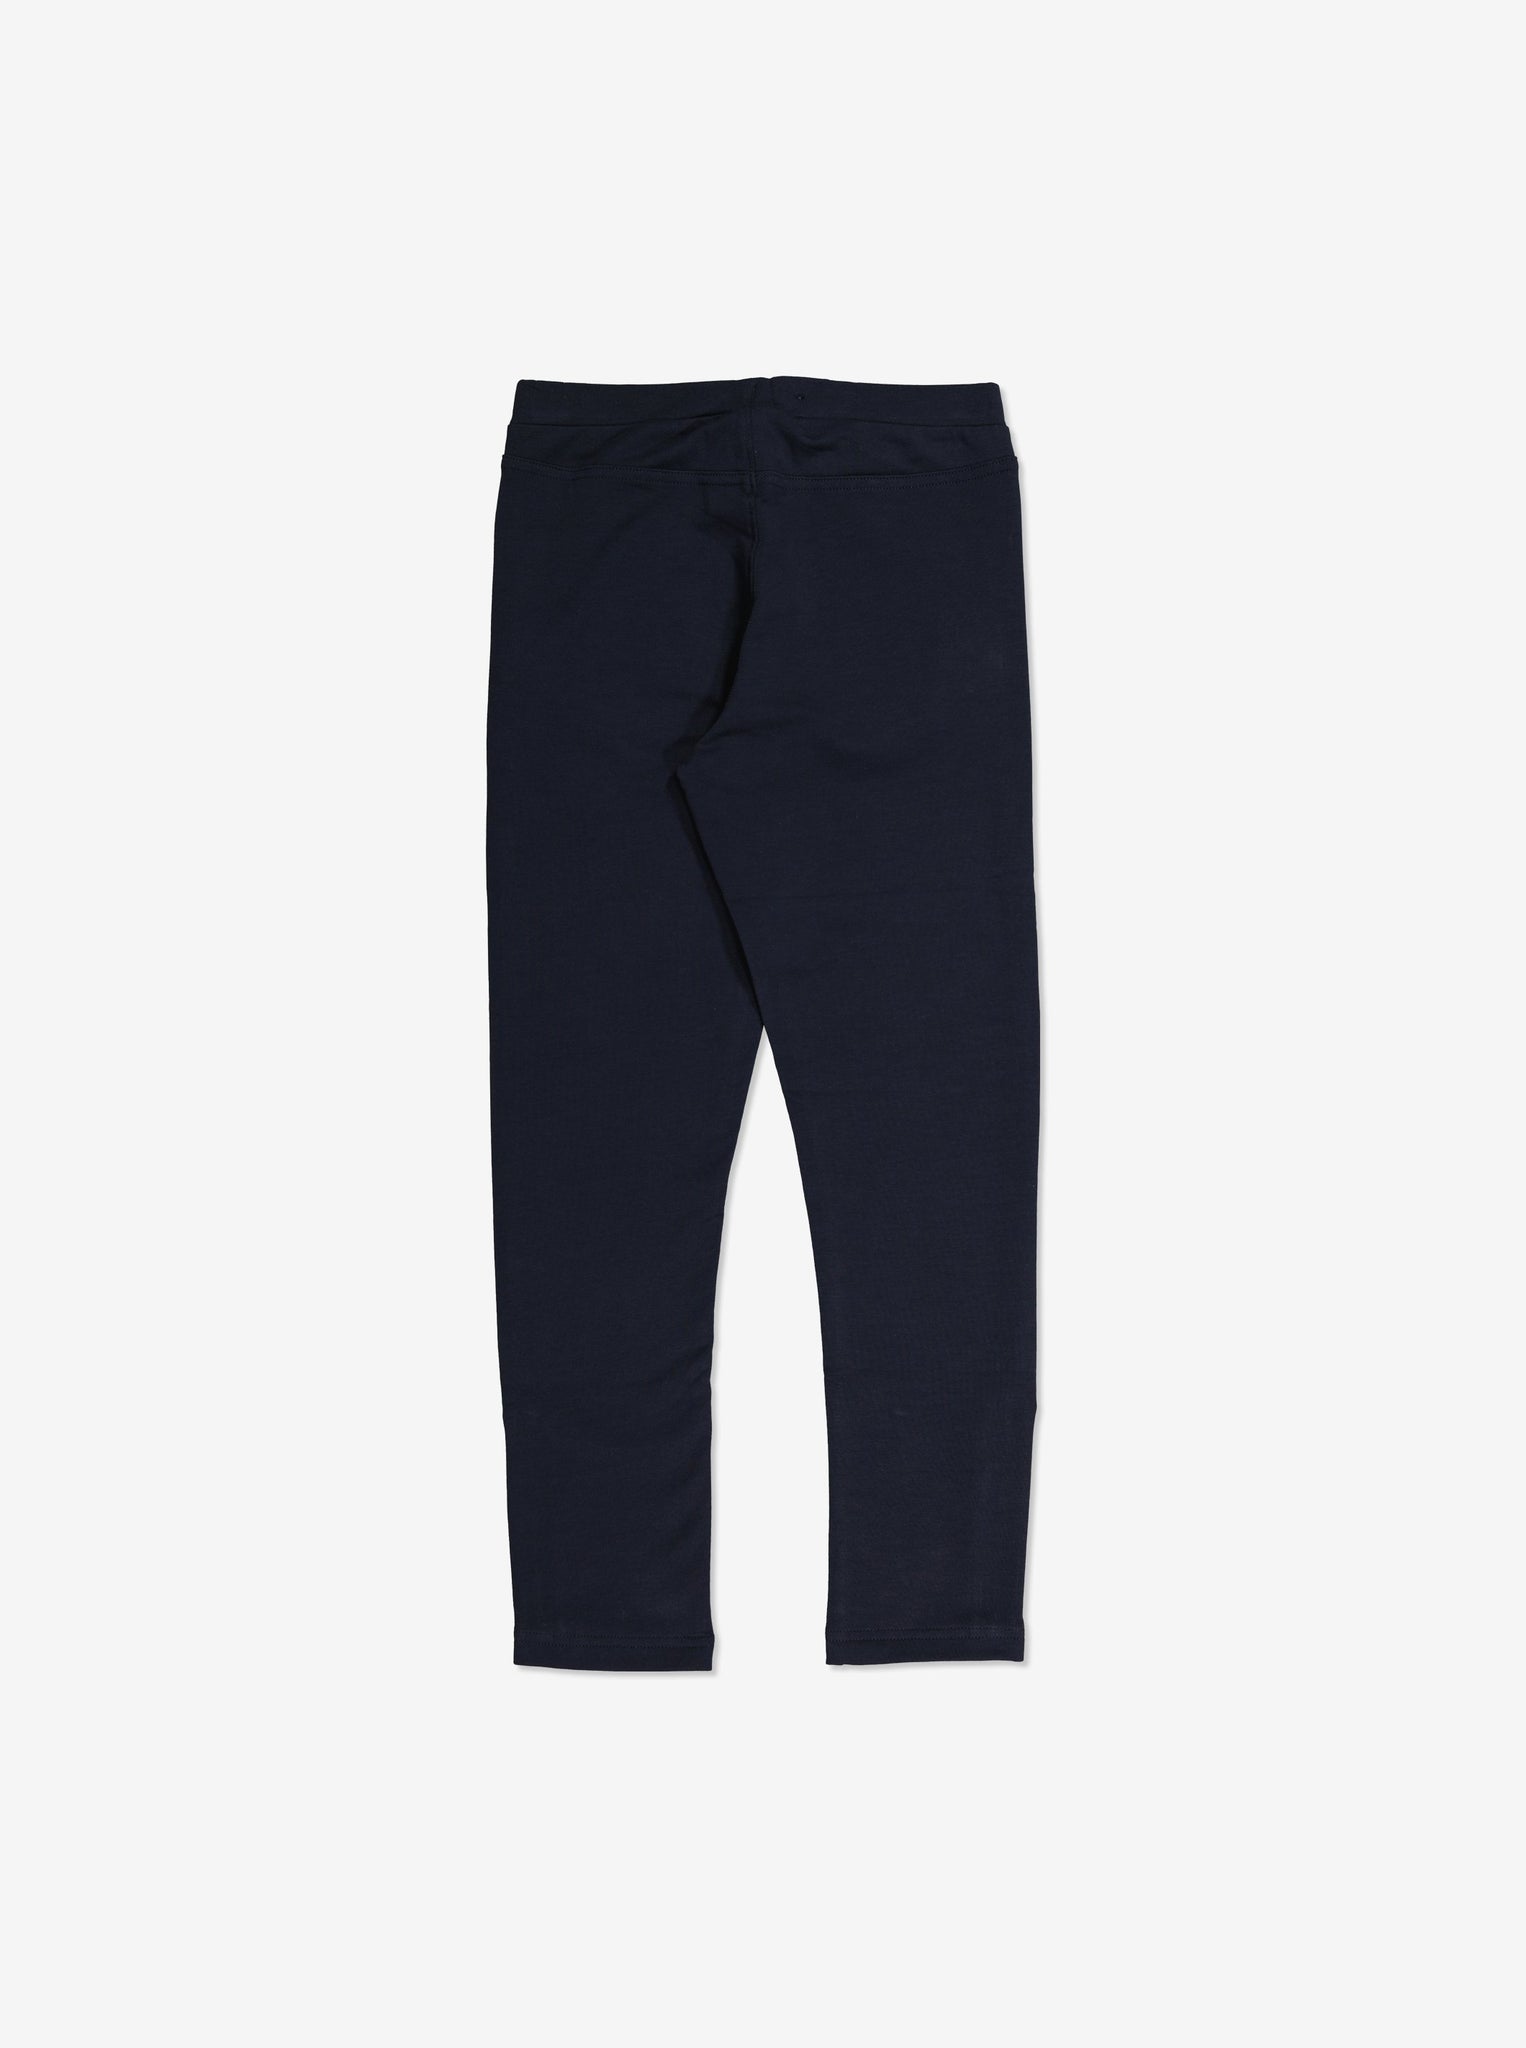  Organic Black Kids Trousers from Polarn O. Pyret Kidswear. Made with 100% organic cotton.